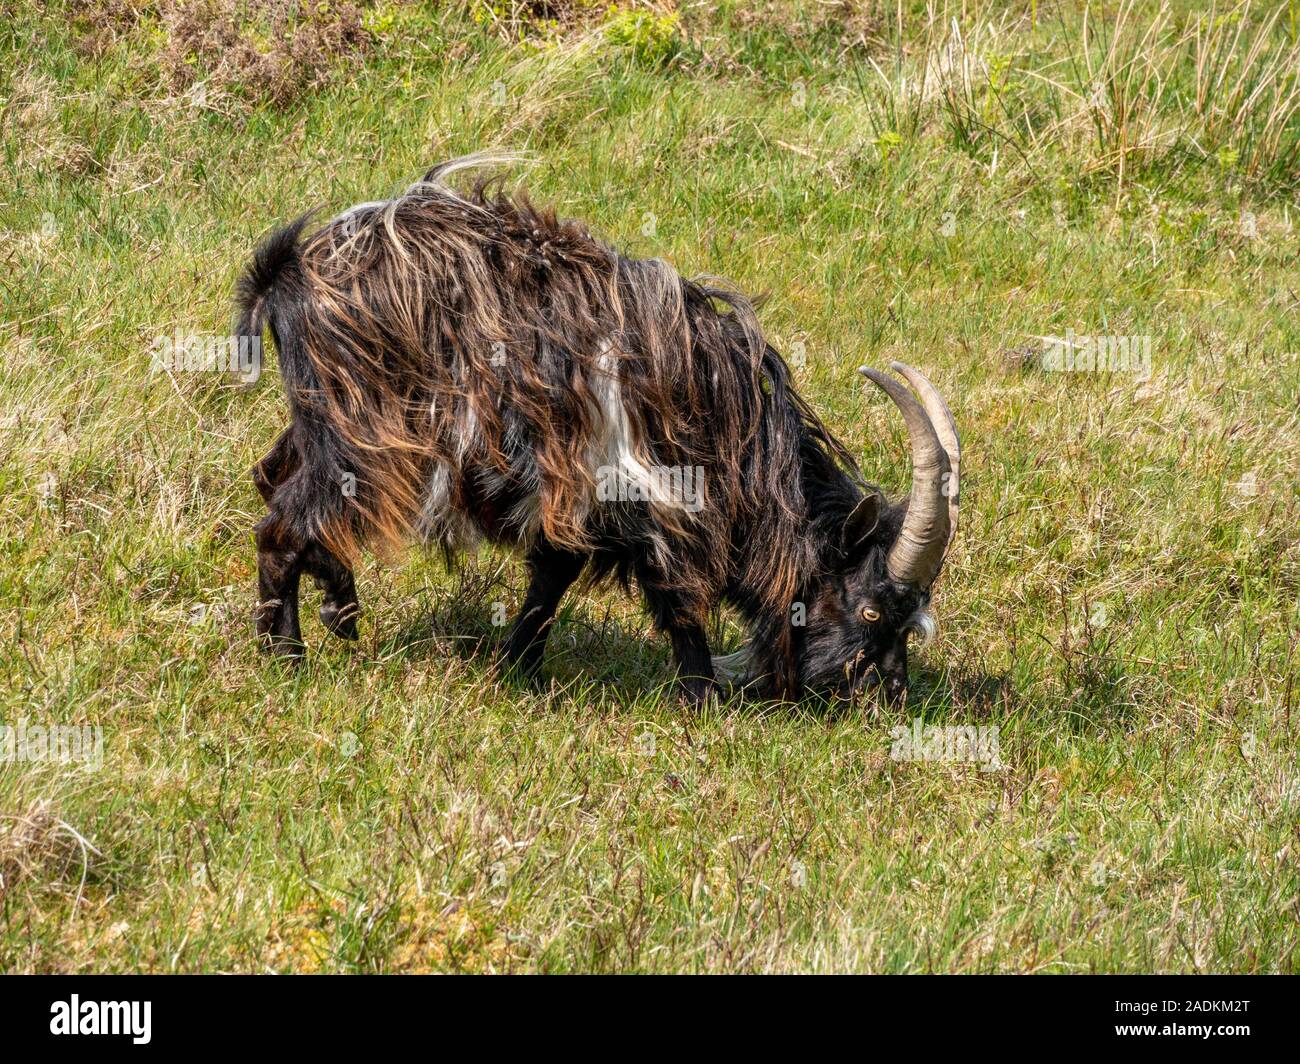 Black / brown long haired wild feral long horned goat gazing on green grass, Isle of Colonsay, Scotland, UK Stock Photo